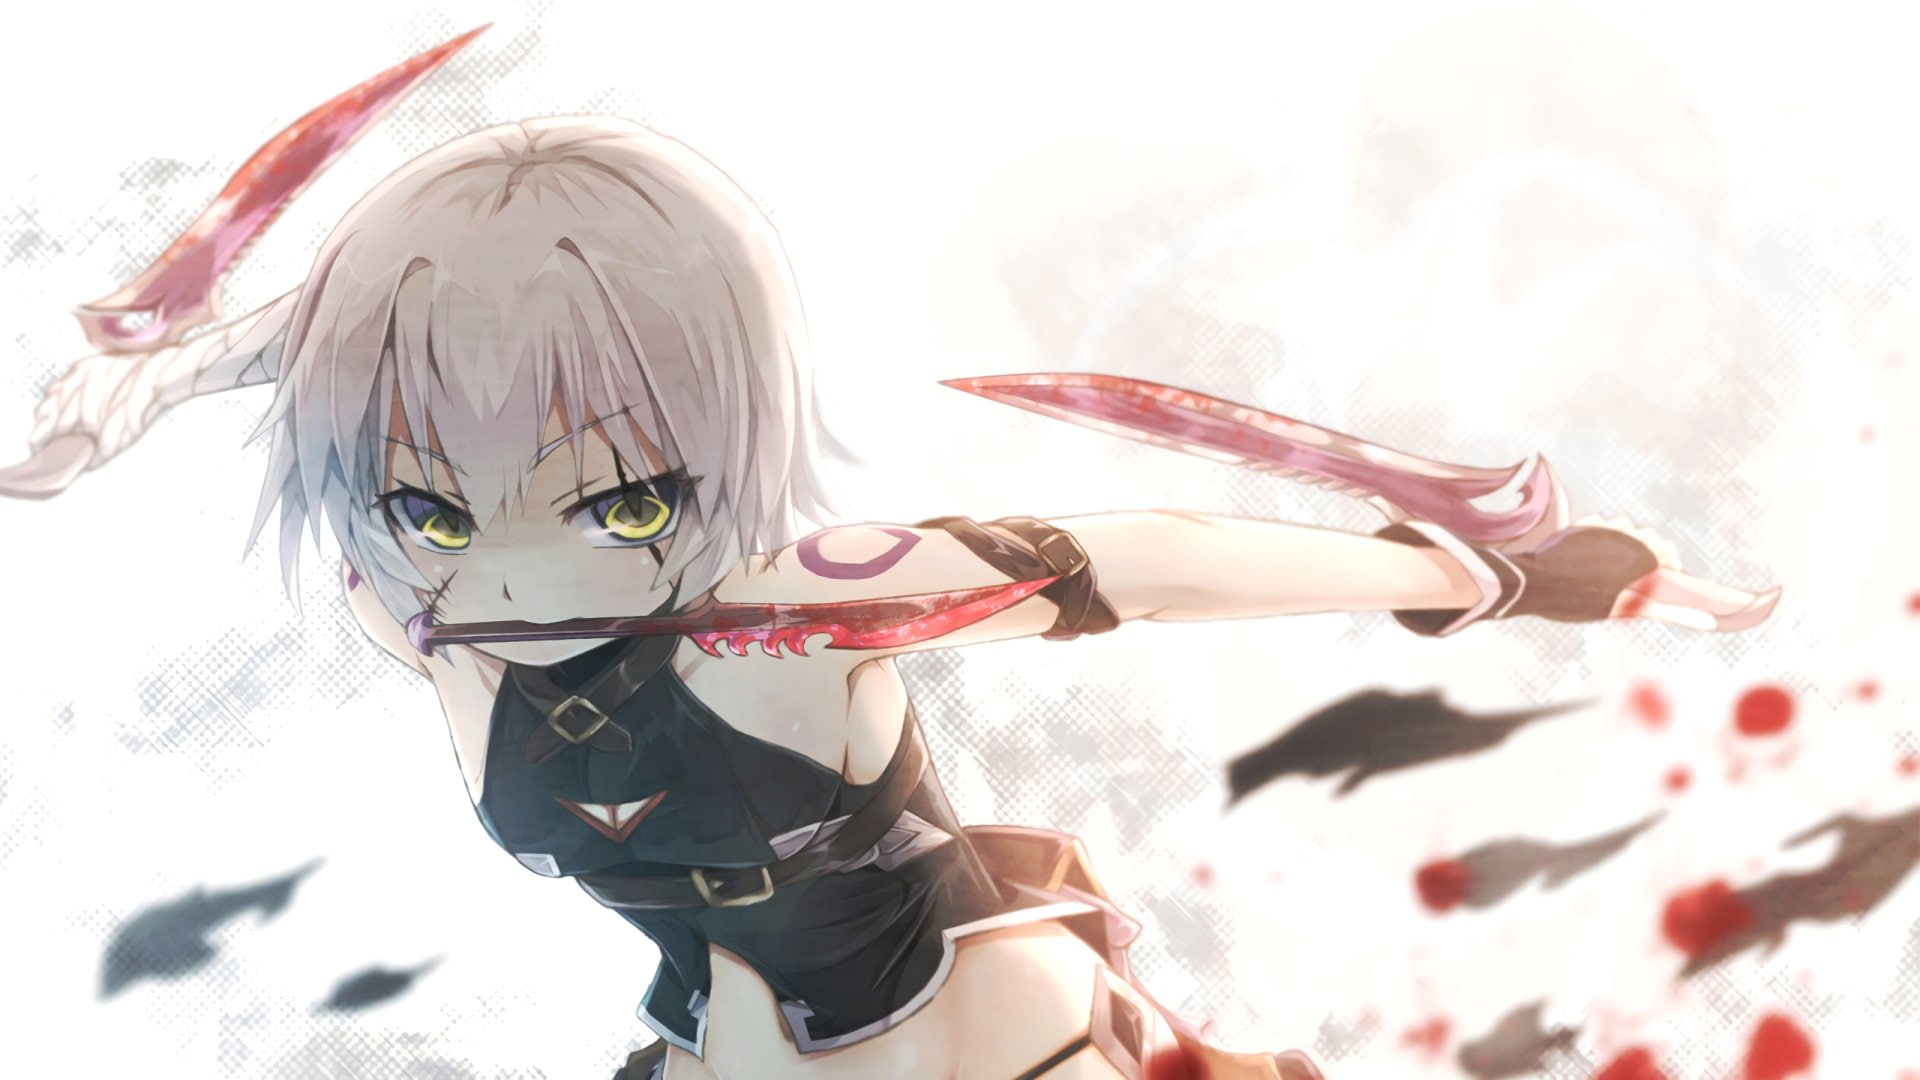 Fate Series, Fate/Grand Order, Assassin of Black (Fate/Apocrypha)